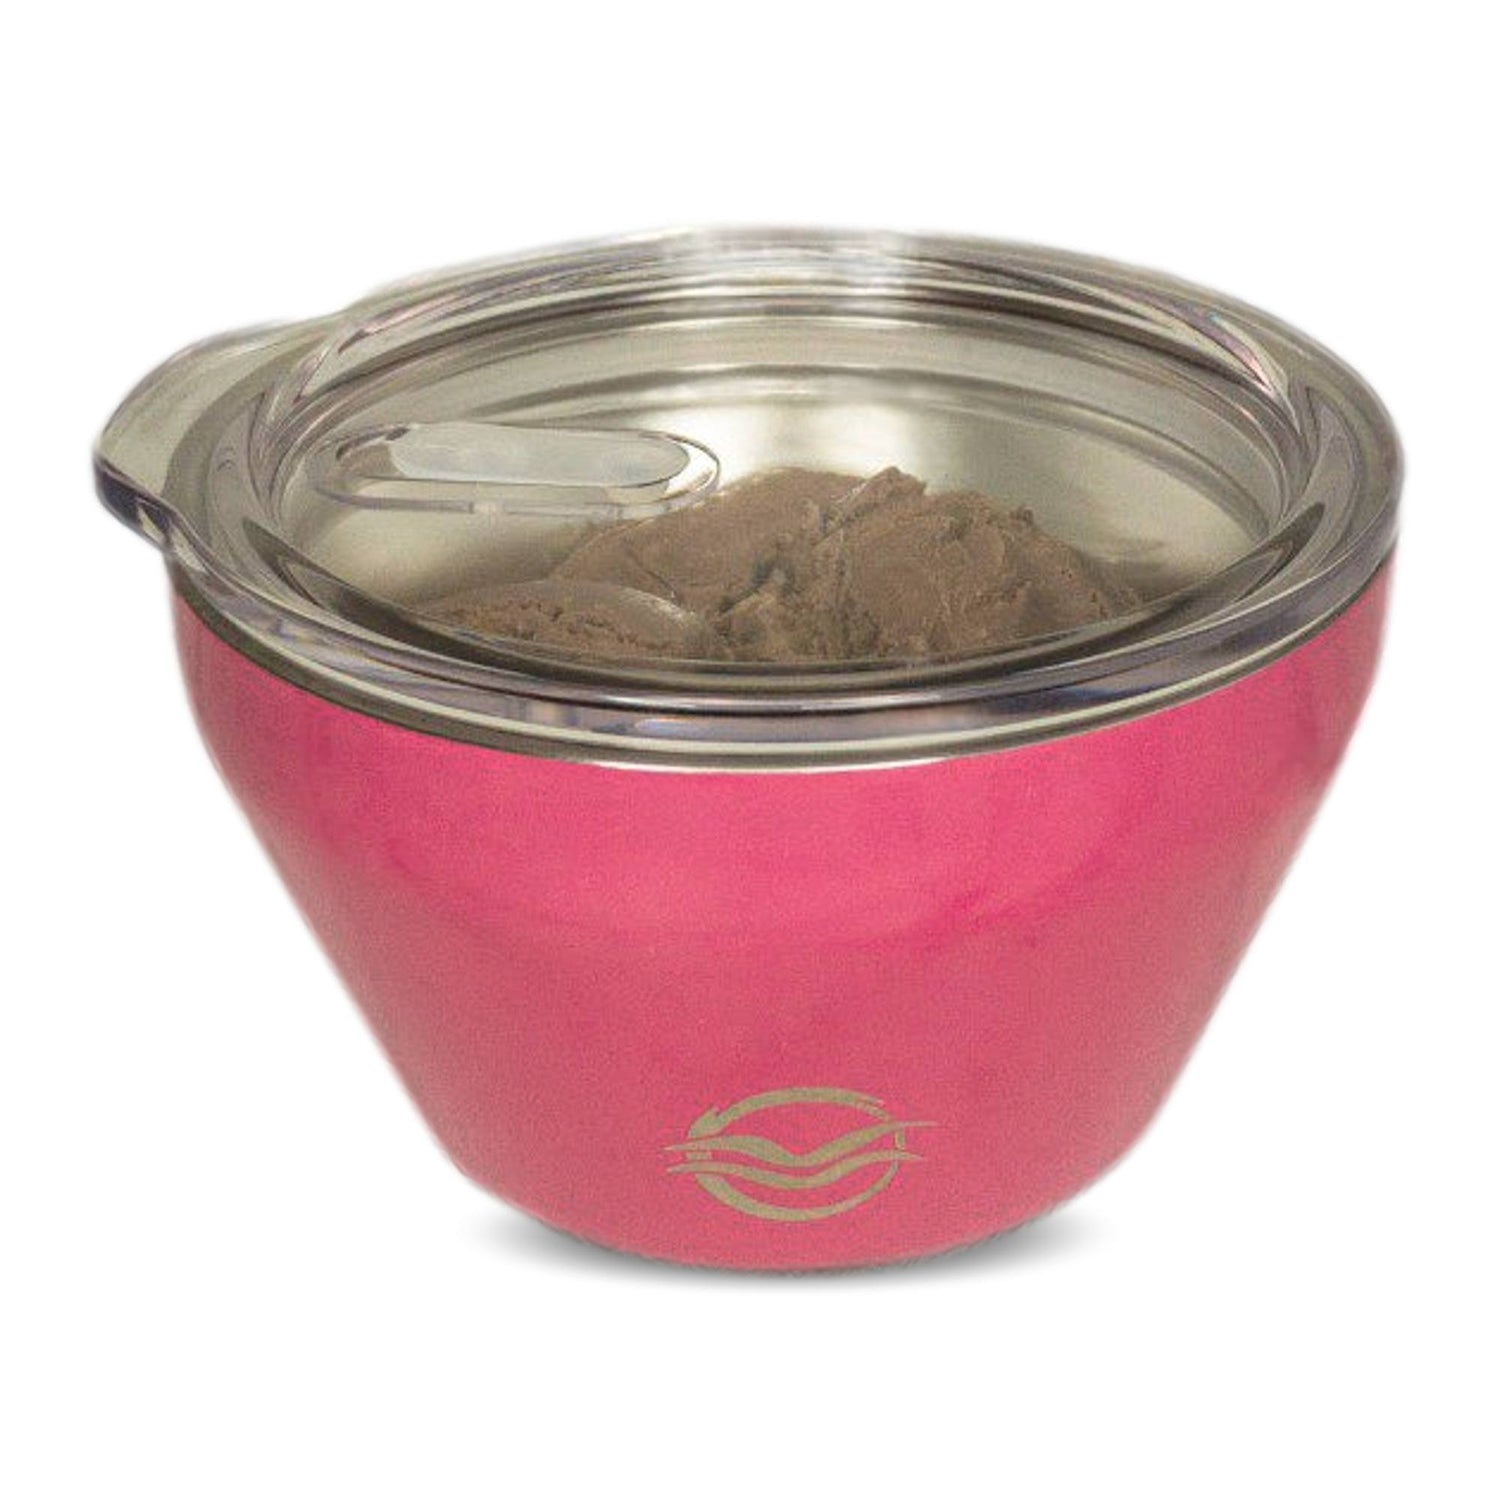 Pink Calicle vacuum insulated ice cream bowl with lid filled with chocolate ice cream